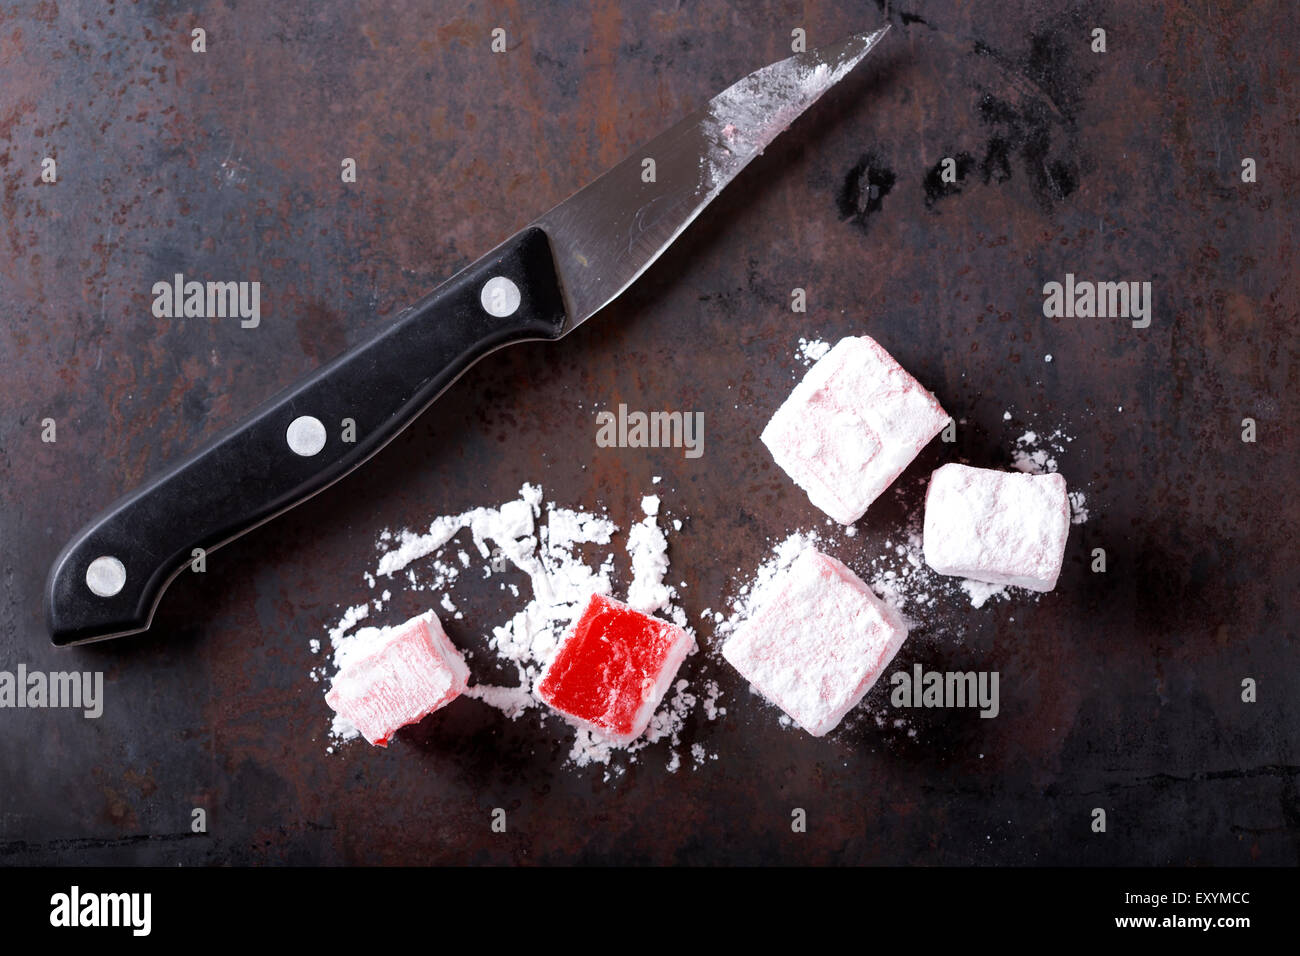 Rose flavored  Turkish delight and one knife in background Stock Photo